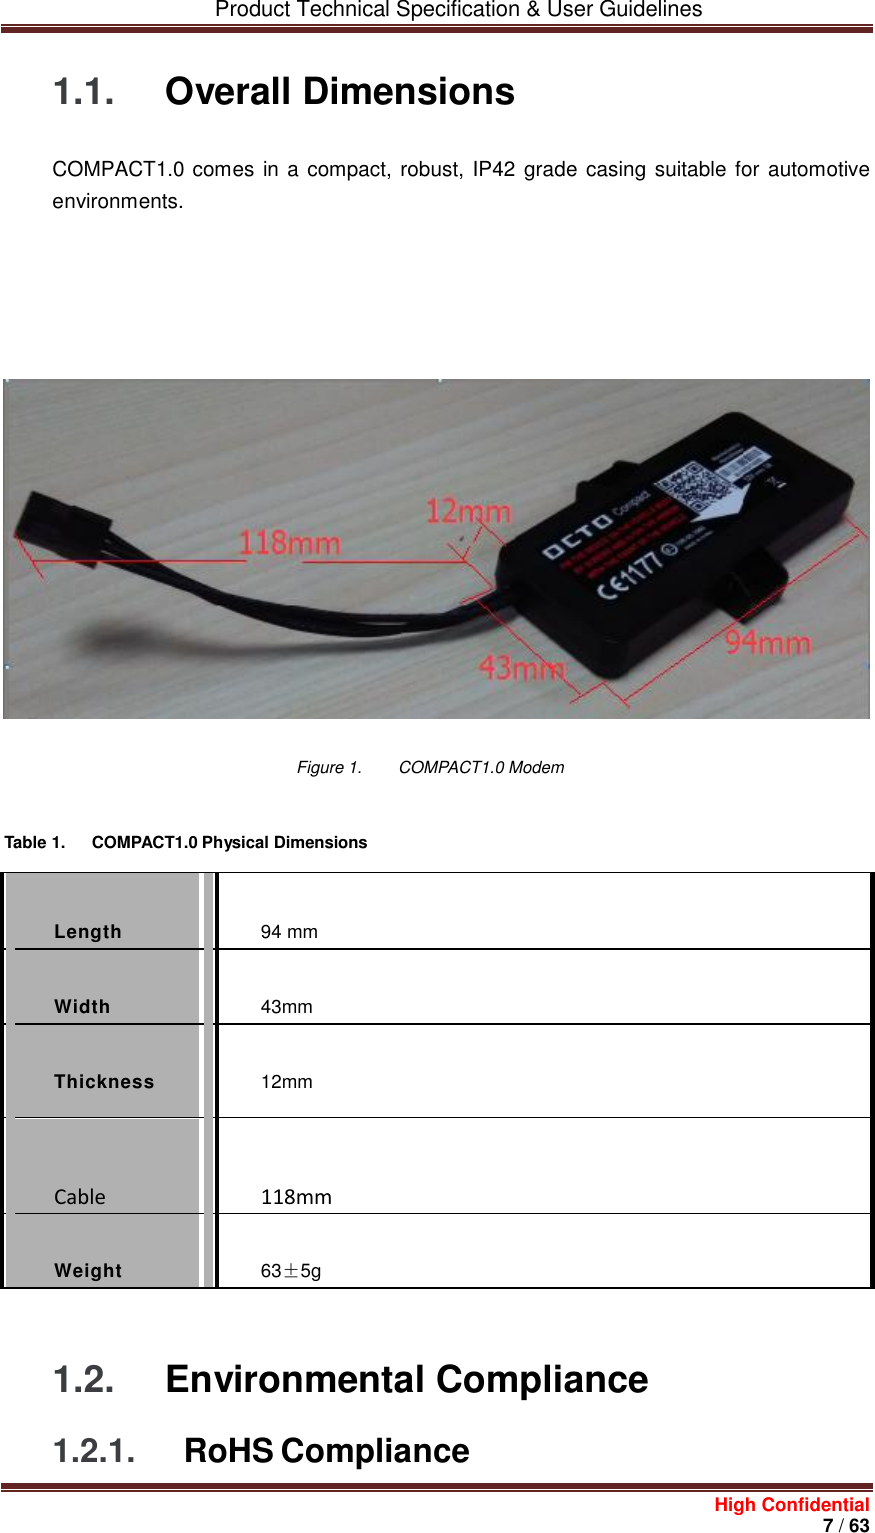         Product Technical Specification &amp; User Guidelines     High Confidential       7 / 63  1.1.  Overall Dimensions COMPACT1.0 comes in a compact,  robust, IP42 grade casing suitable for automotive environments.                                                                                                           Figure 1.  COMPACT1.0 Modem   Table 1.  COMPACT1.0 Physical Dimensions     Length   94 mm   Width   43mm   Thickness   12mm   Cable   118mm   Weight   63±5g  1.2.  Environmental Compliance 1.2.1. RoHS Compliance 